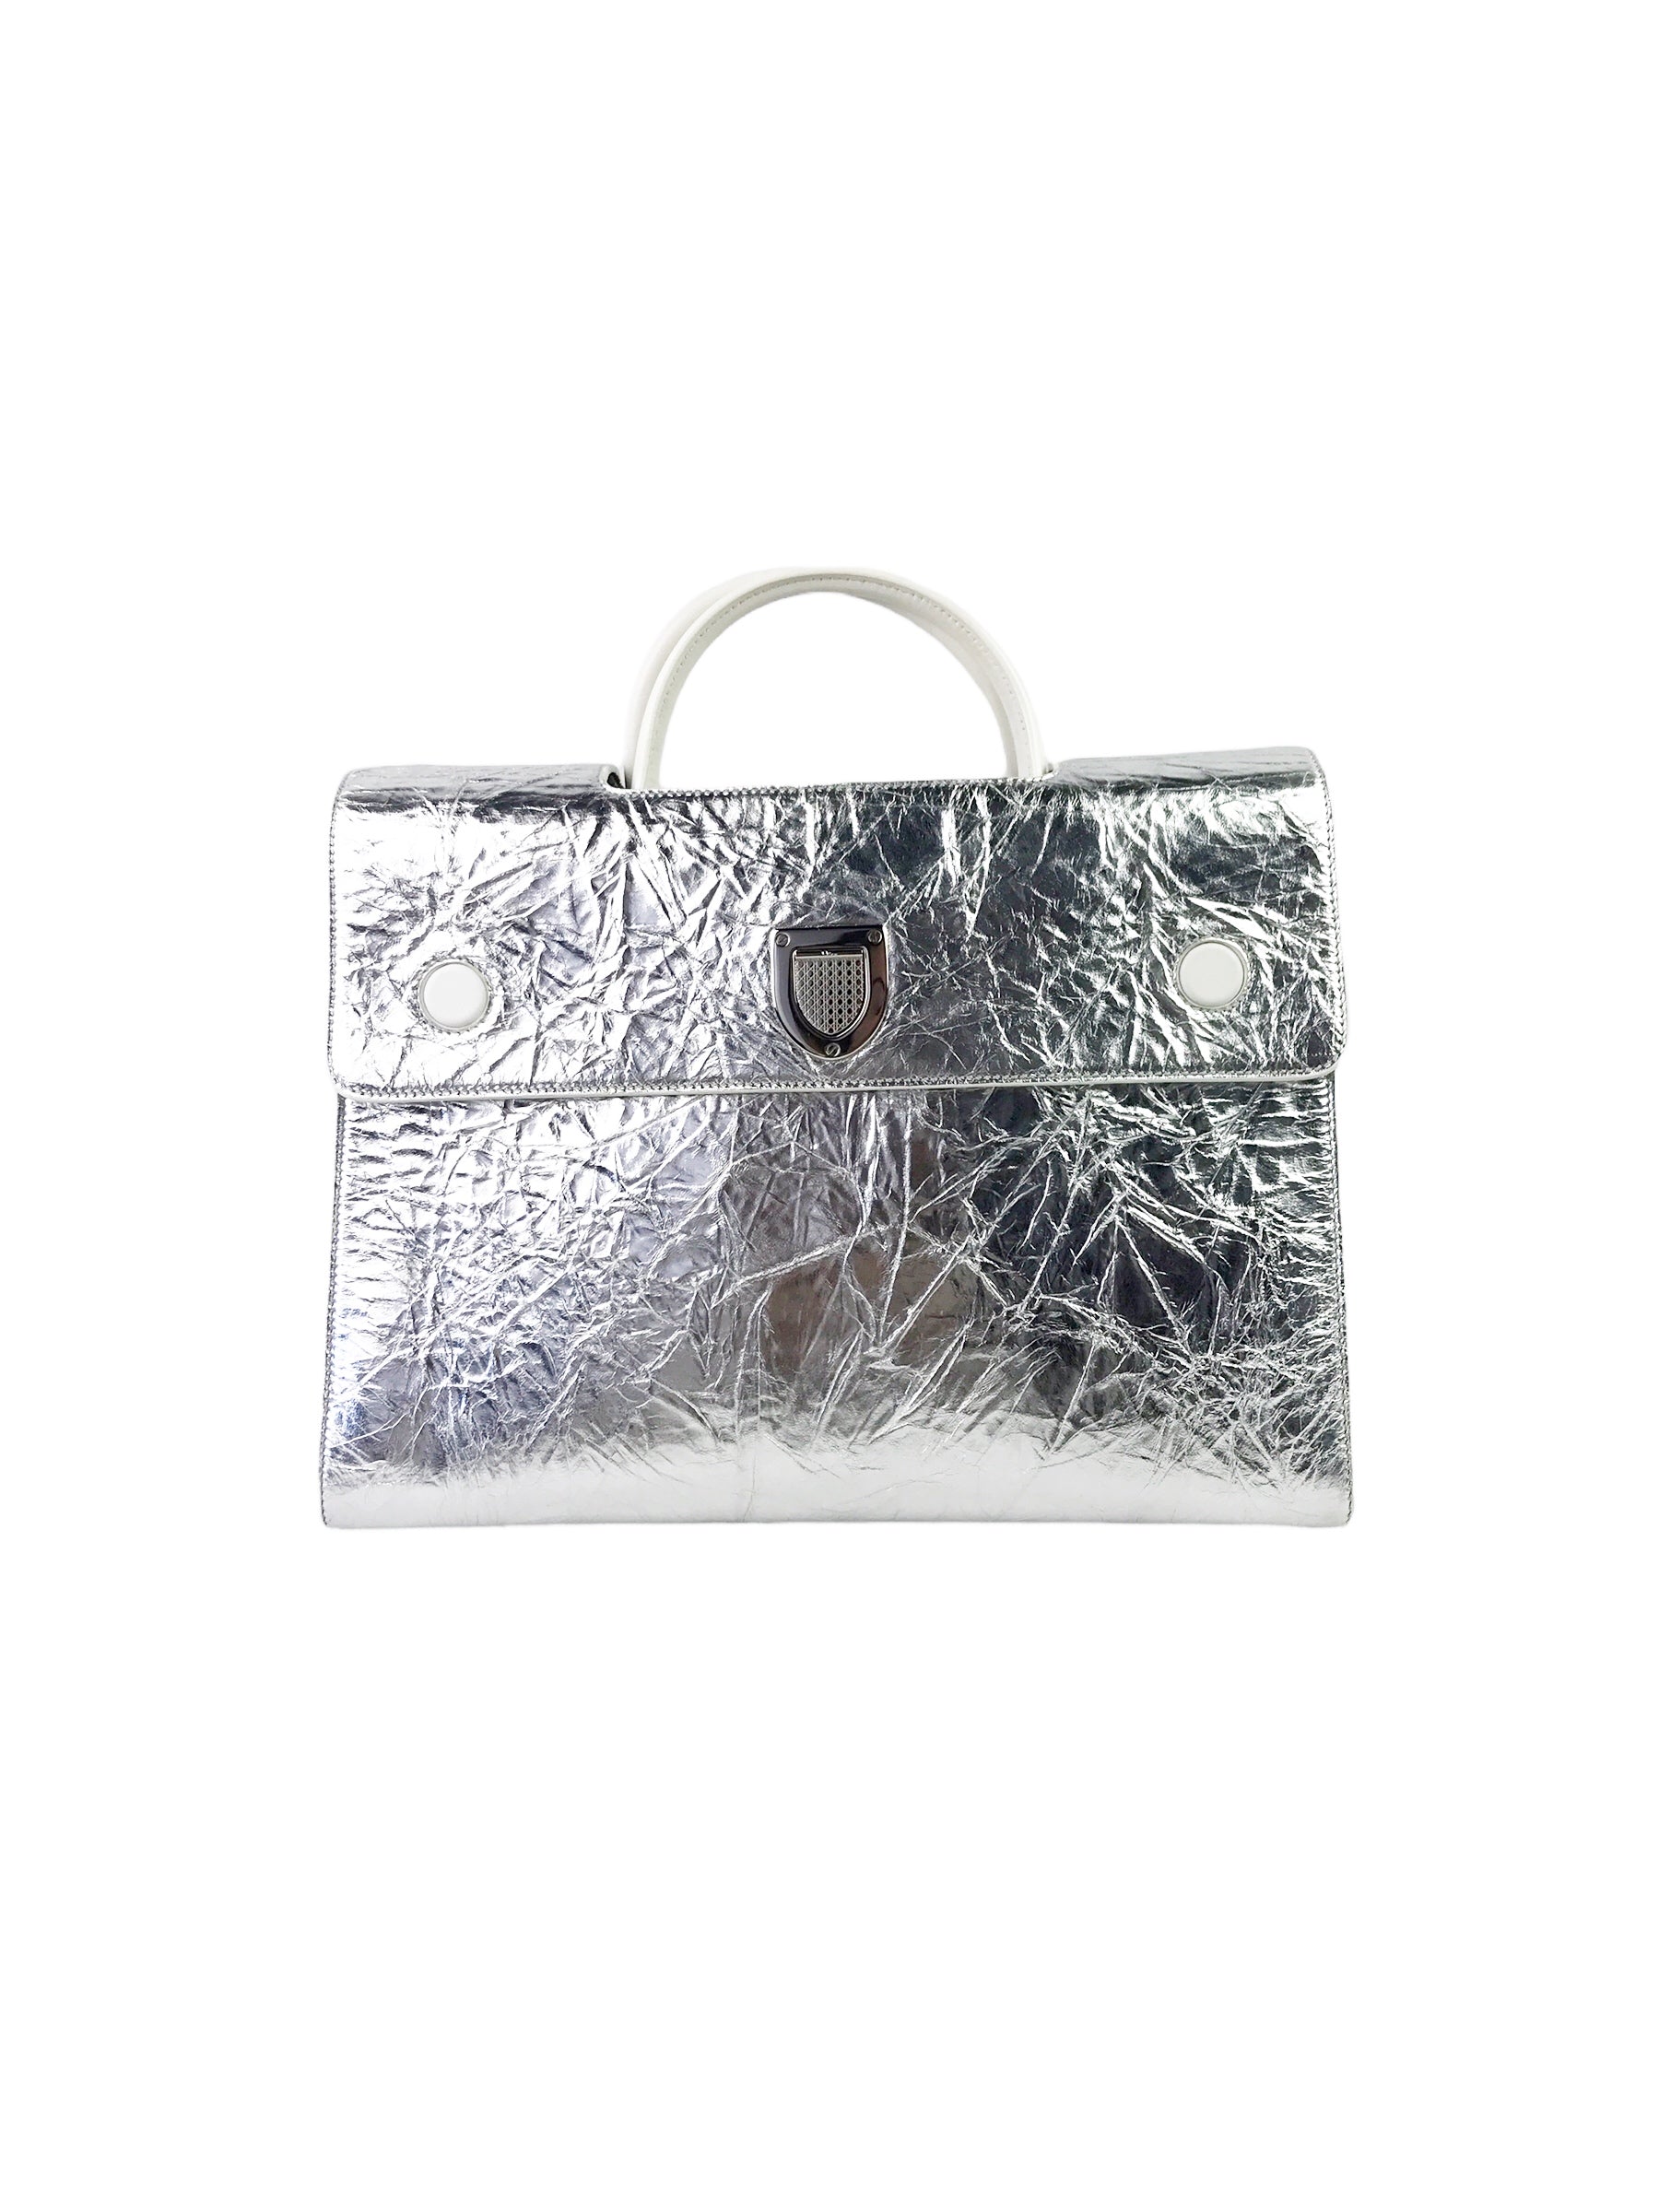 Silver Leather Large Diorever Bag W/SHW